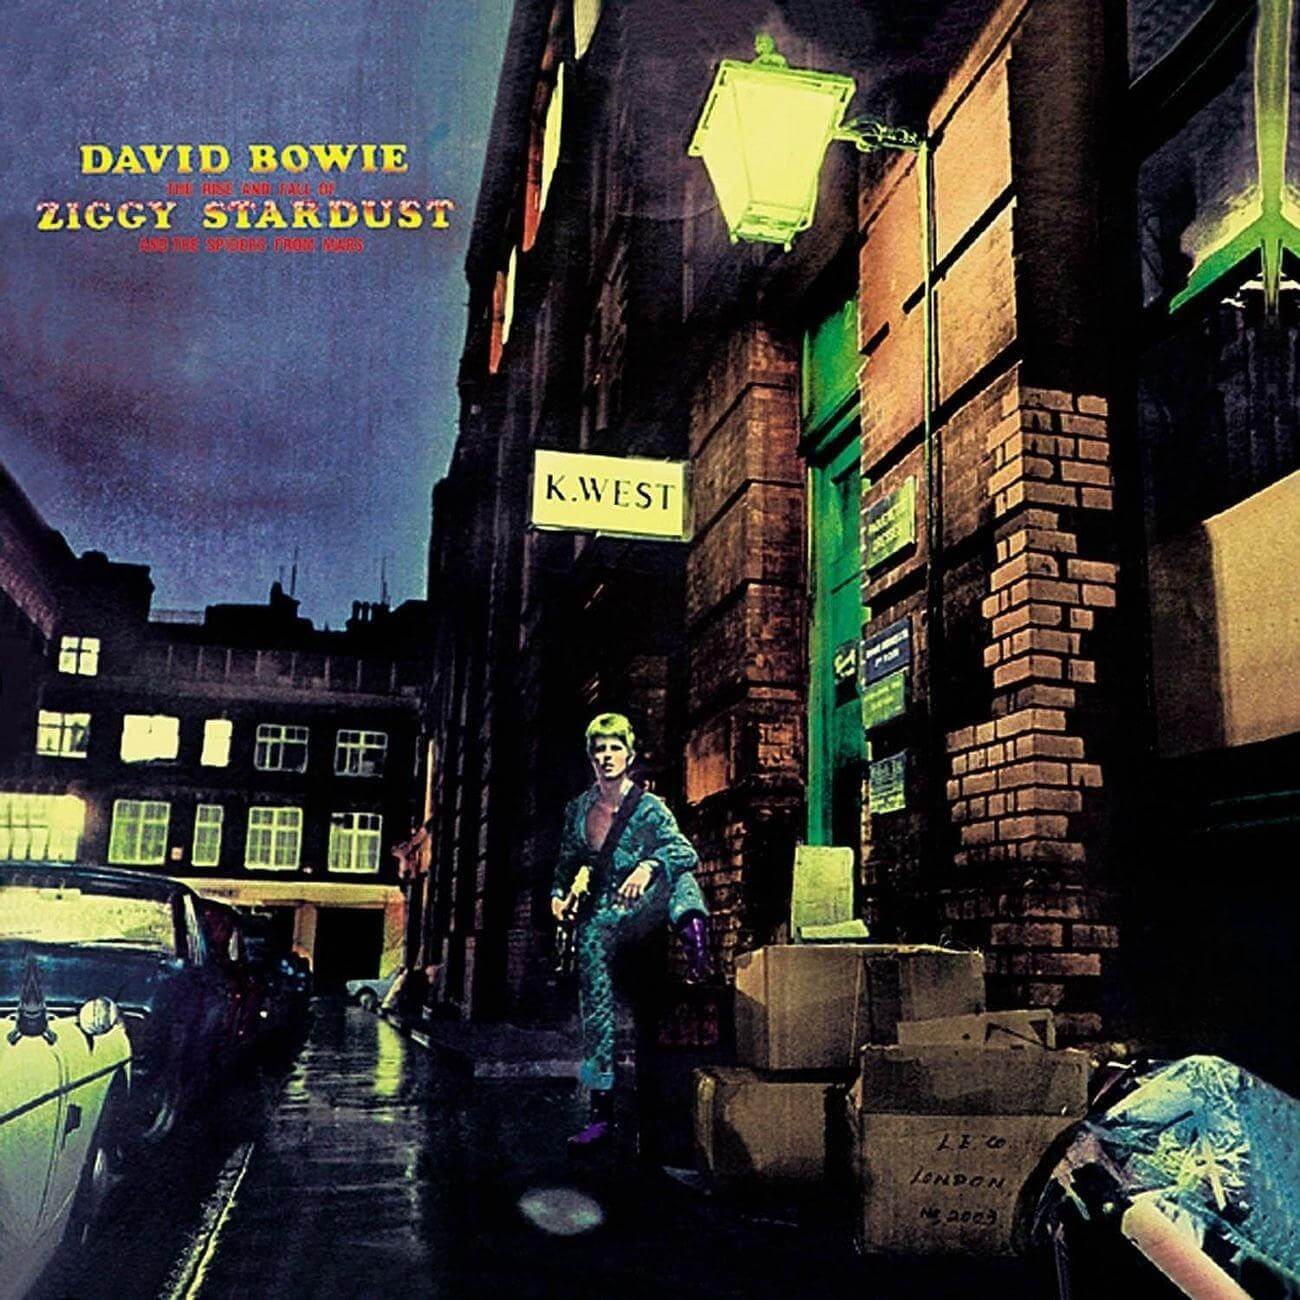 David Bowie - 'The Rise and Fall of Ziggy Stardust and the Spiders from Mars'.